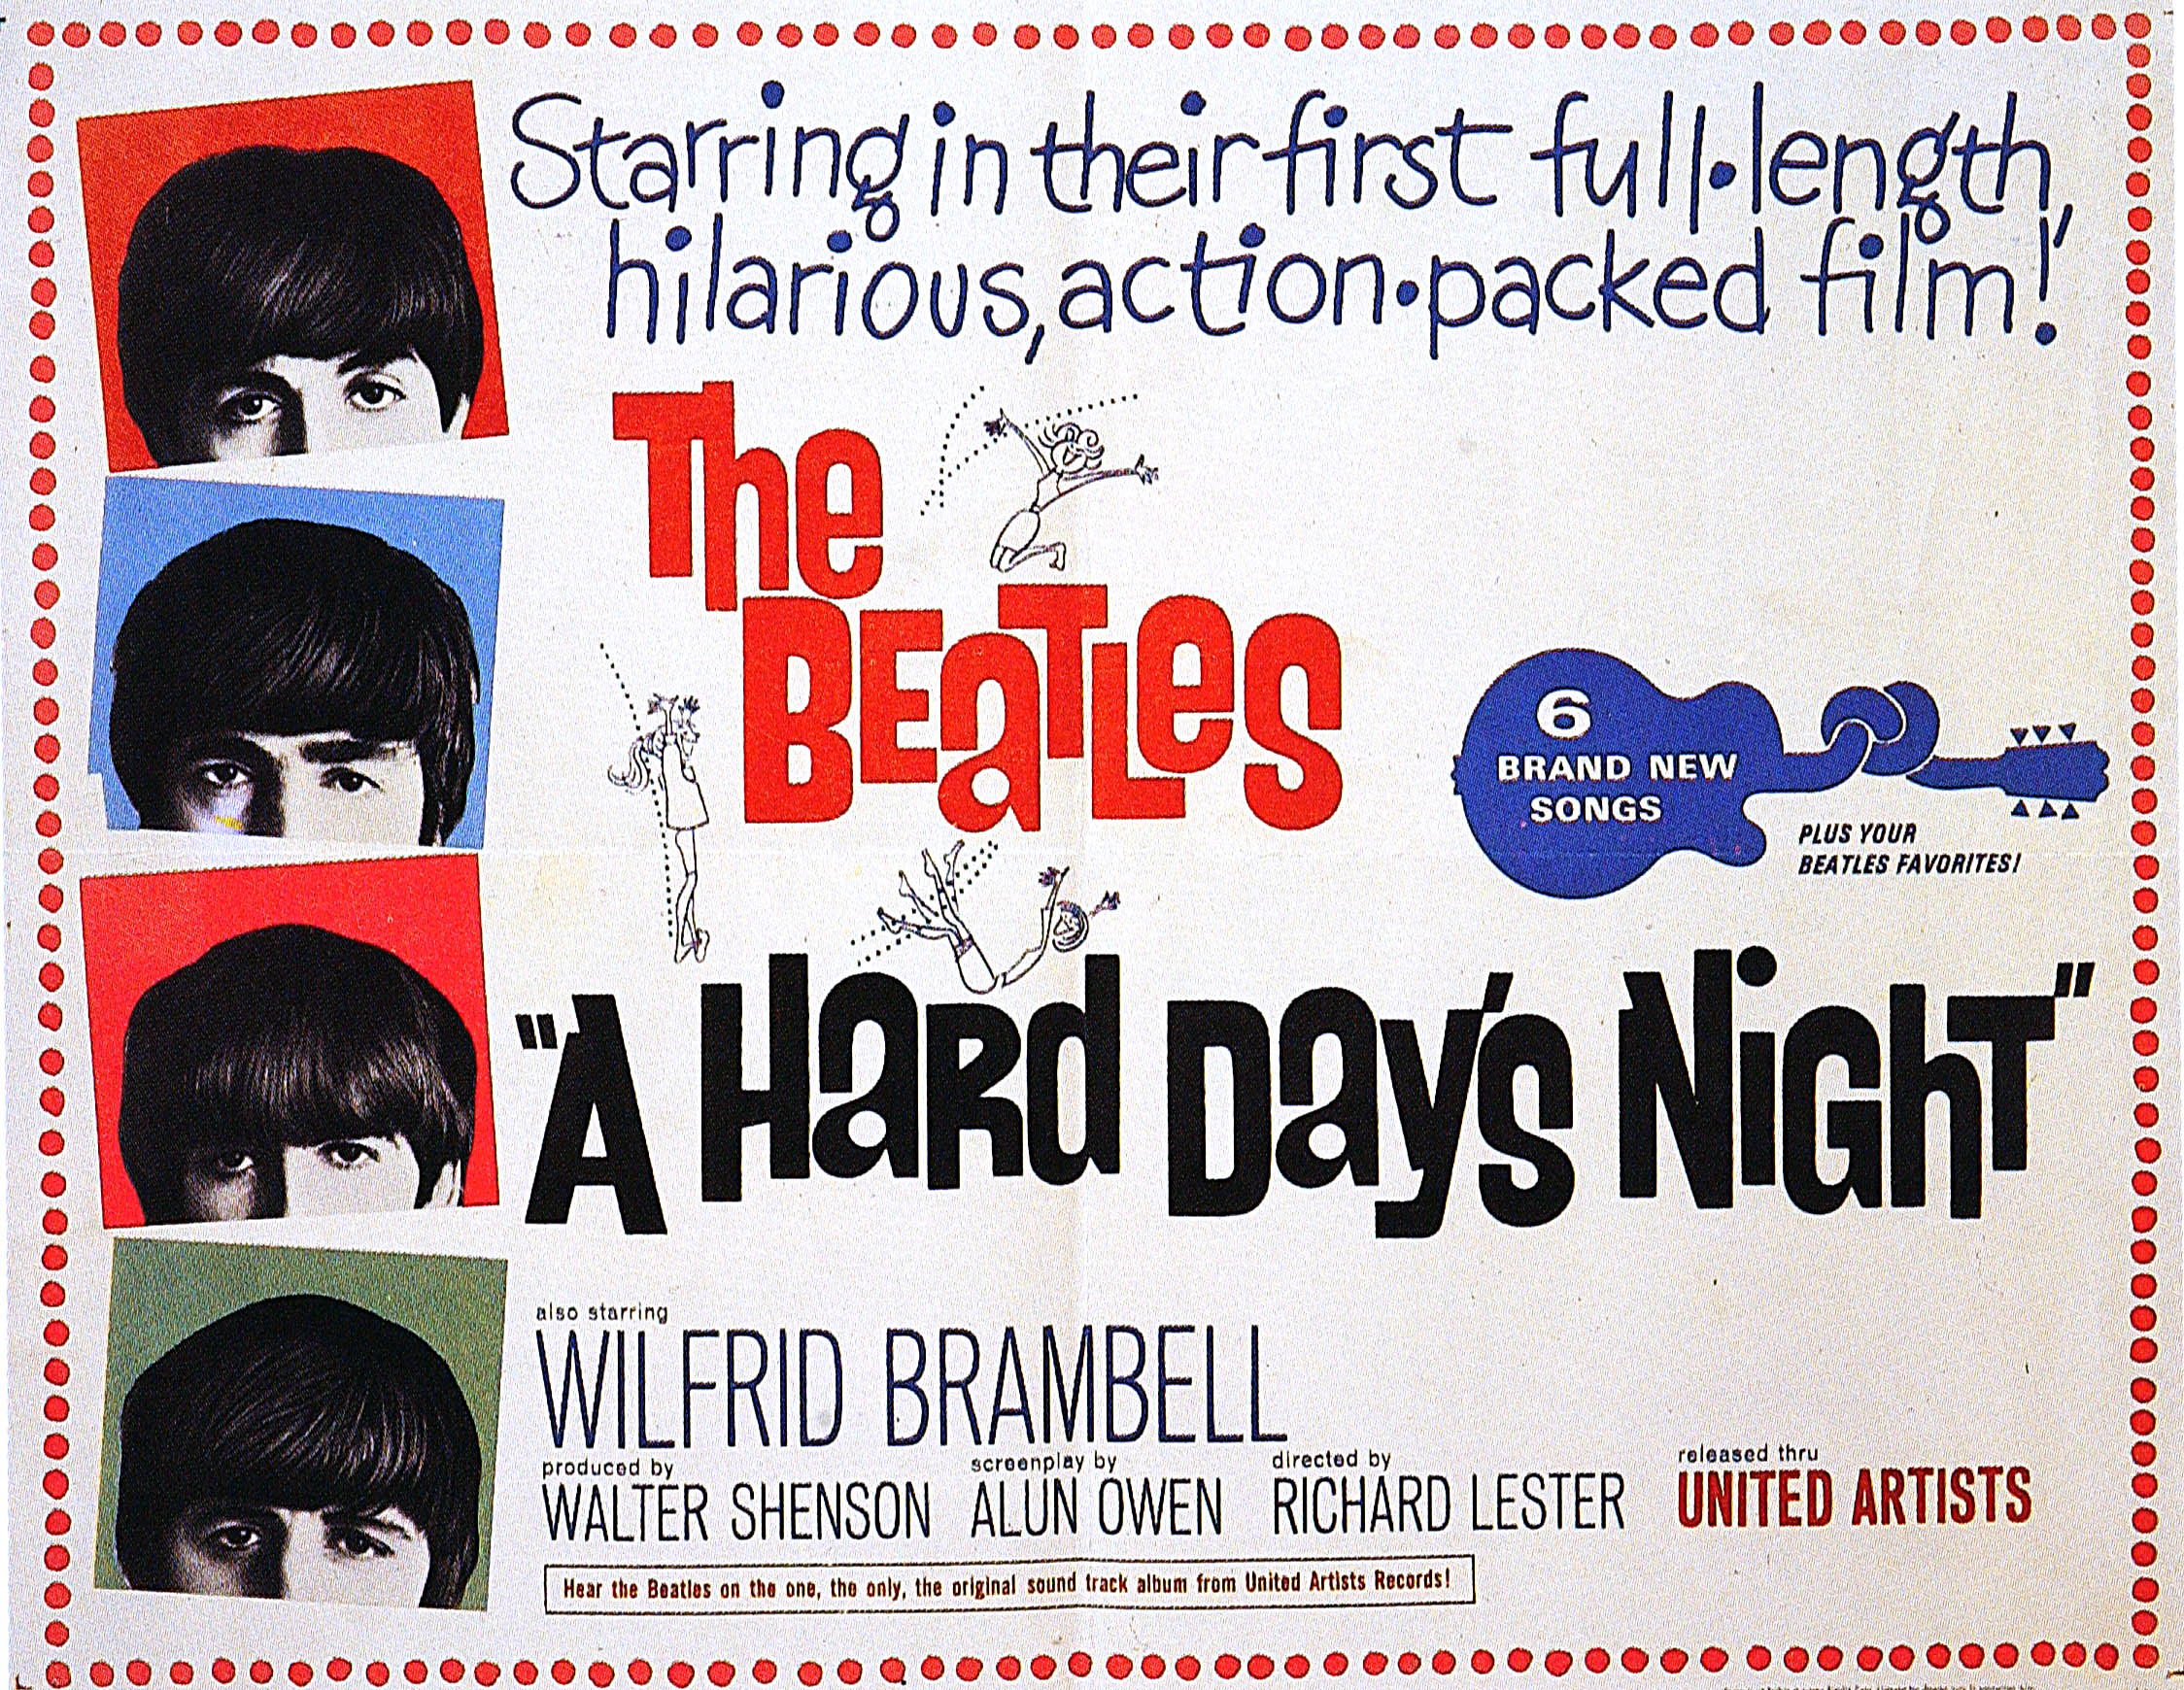 A poster for The Beatles' 'A Hard Day's Night' depicting Paul McCartney, John Lennon, George Harrison, and Ringo Starr